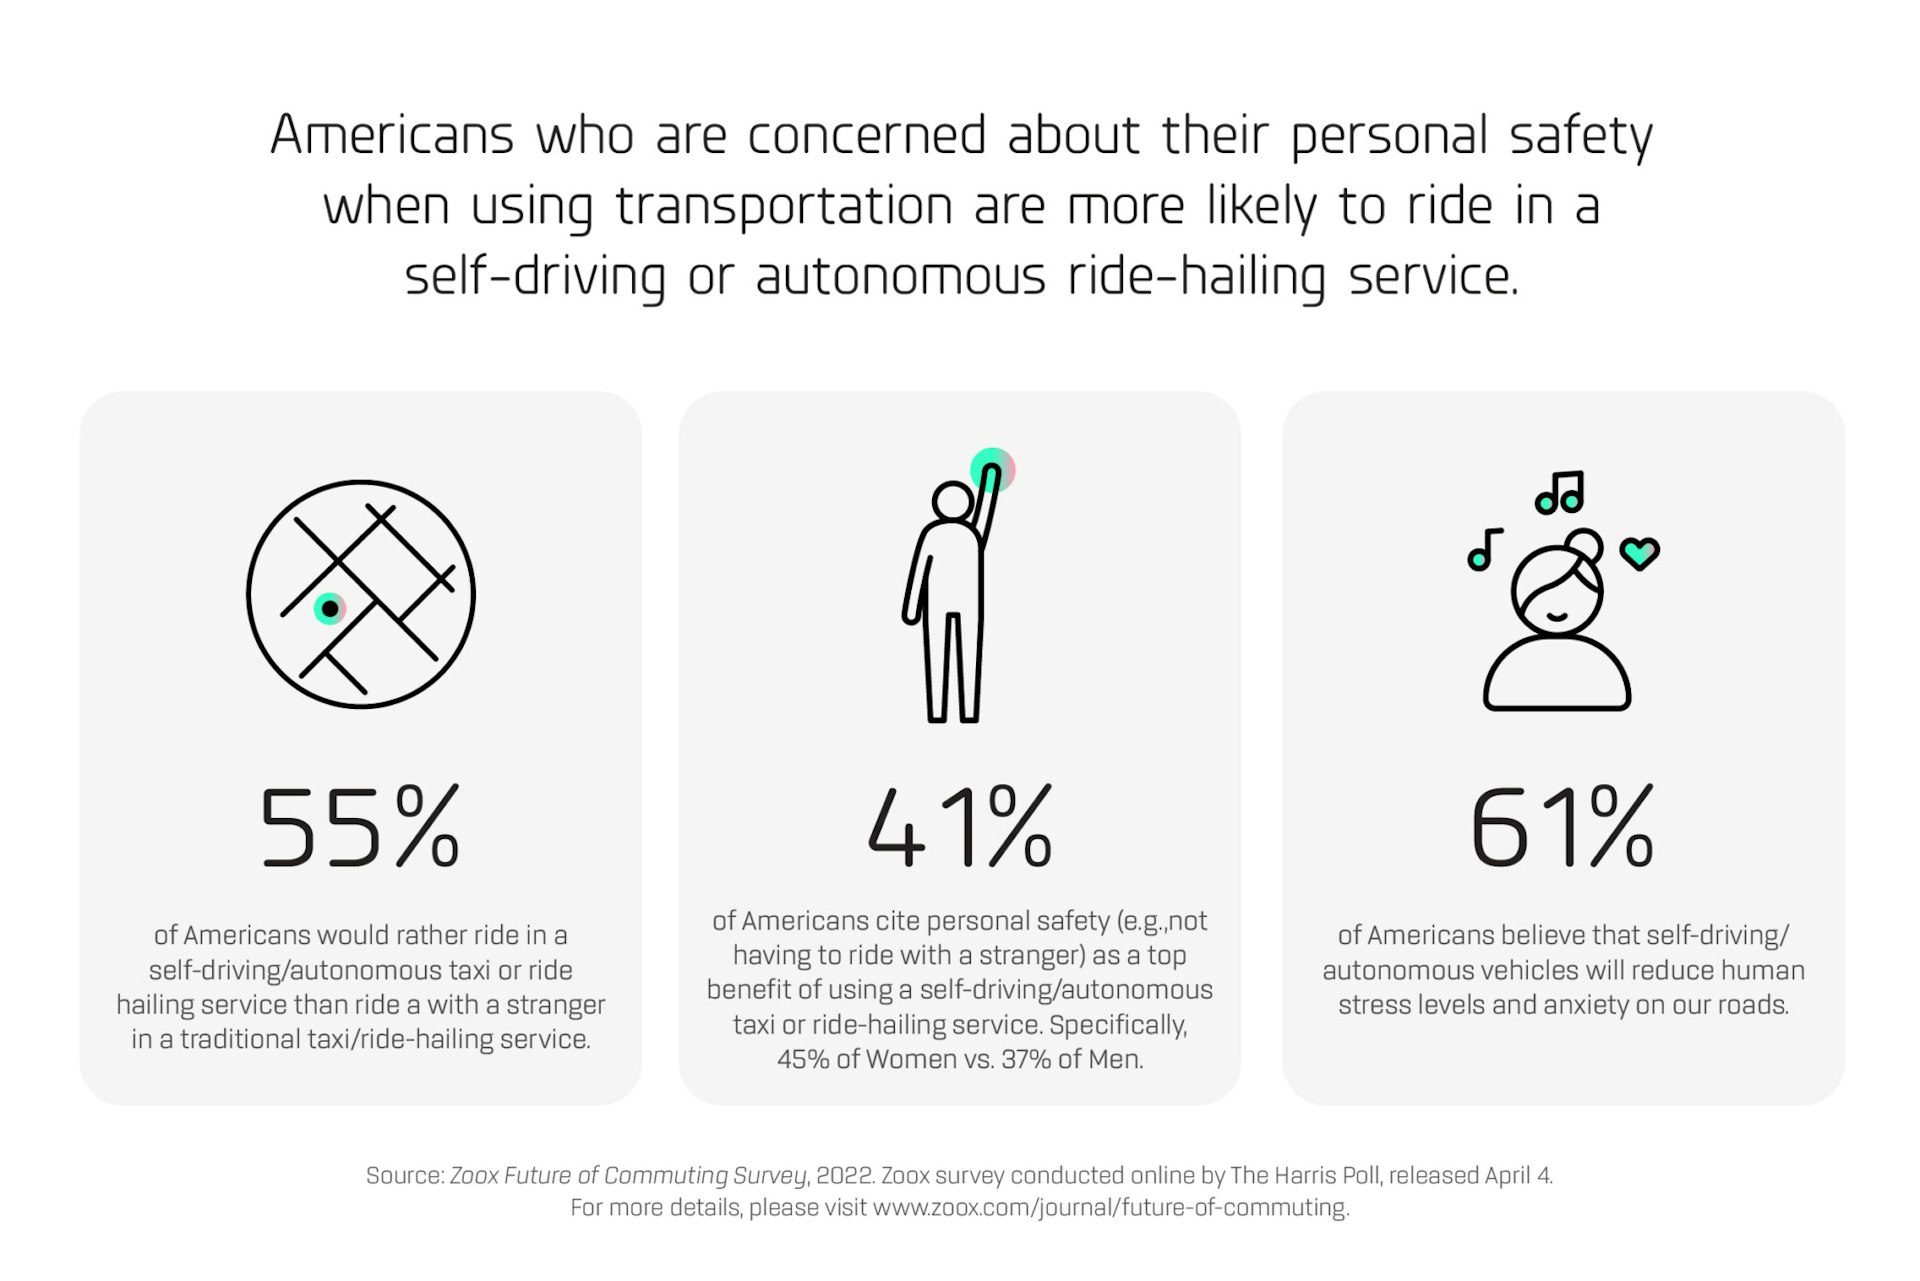 This image is an infographic from a survey about the future of transportation and commuting conducted by autonomous vehicle company, Zoox, and market research firm, the Harris Poll. This infographic shows the results of three questions about autonomous vehicles and personal safety. The infographic includes three columns that each have an illustration at the top of the column, a percentage in the middle of the column, and a written description at the bottom of the column. At the bottom of the infographic there are directions to visit www.zoox.com/journal/future-of-commuting for more information. The first column has an illustration of a circle with lines drawn inside the circle to look like roads on a map. It includes the stat: 55% of Americans would rather ride in a self-driving/autonomous taxi or die hailing service than ride with a stranger in a traditional taxi/ride-hailing service. The second column has an illustration of the outline of a faceless human raising its hand. It includes the stat: 41% of Americans cite personal safety (e.g. not having to ride with a stranger) as a top benefit of using a self-driving/autonomous taxi or ride-hailing service. Specifically, 45% of Women v. 37% of Men. The third column has an illustration of a faceless head with bangs and a bun on an upper body. The face has a mouth that is smiling. Floating around the head are illustrations of two music notes and a heart. It includes the stat: 61% of Americans believe that self-driving/autonomous vehicles will reduce human stress levels and anxiety on our roads.